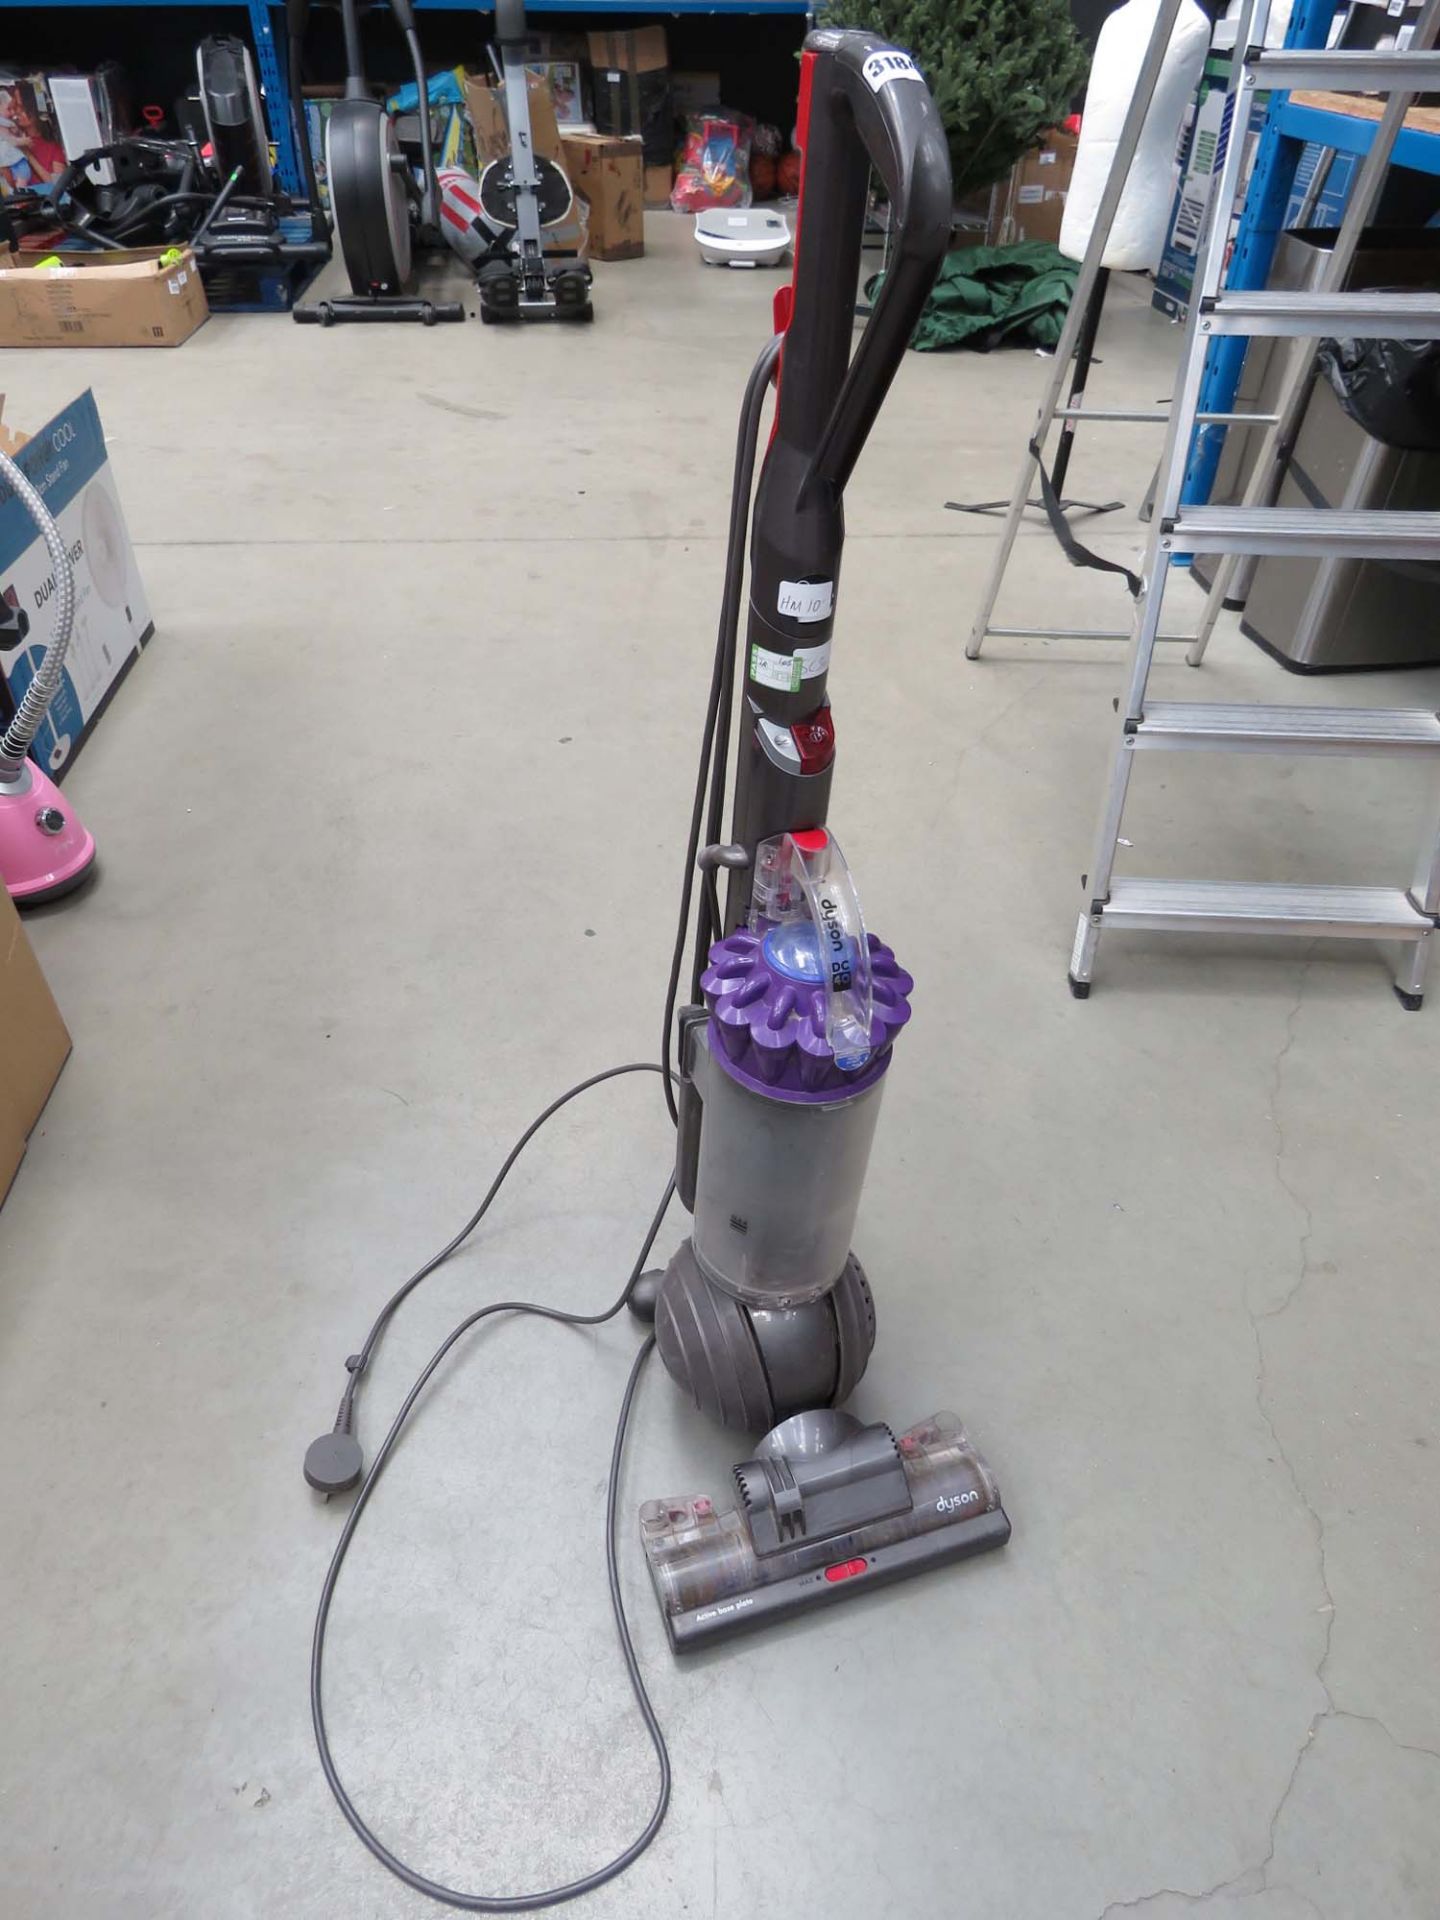 Upright Dyson DC40 vacuum cleaner